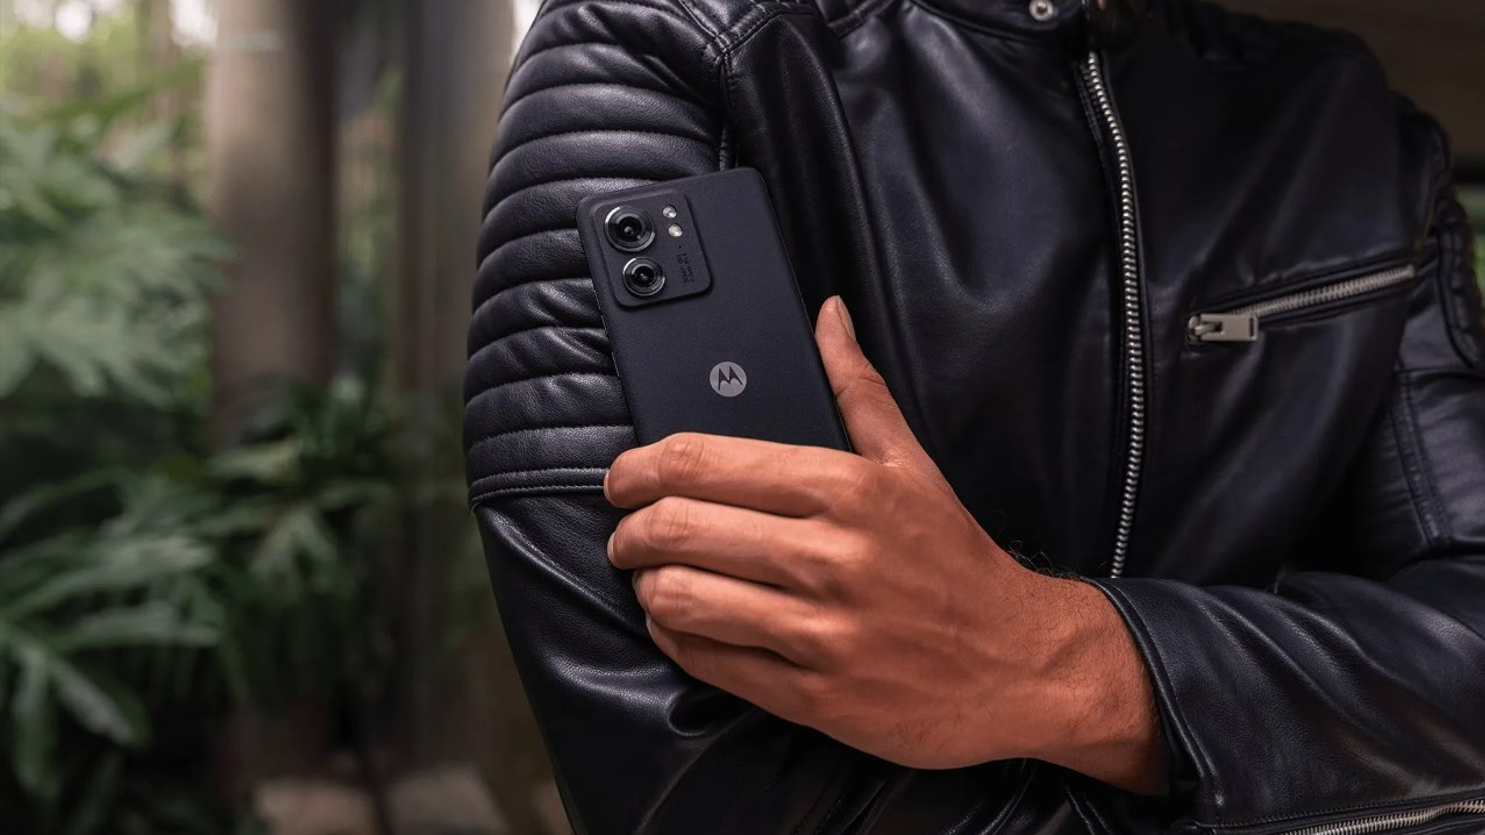 Motorola edge (2023) held by a person in a leather jacket against a forested background